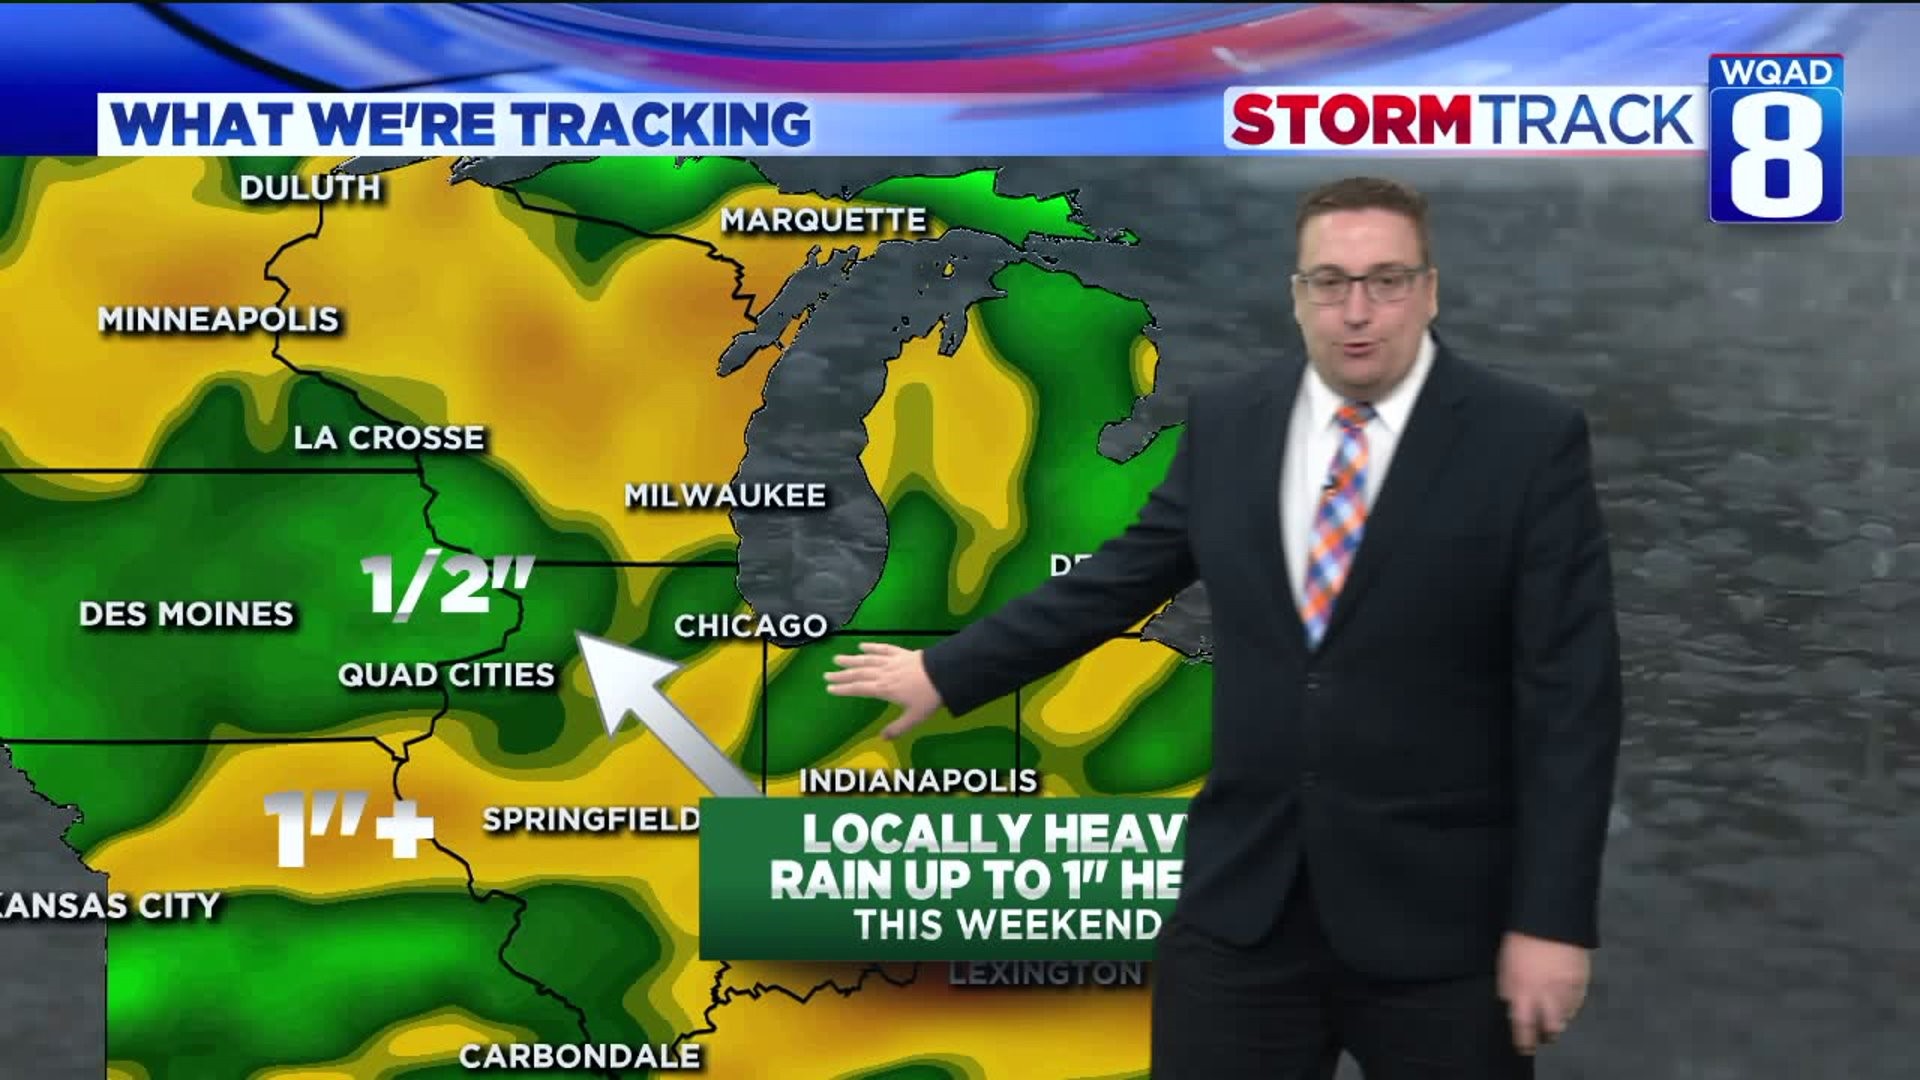 Tracking another strong storm system for the weekend